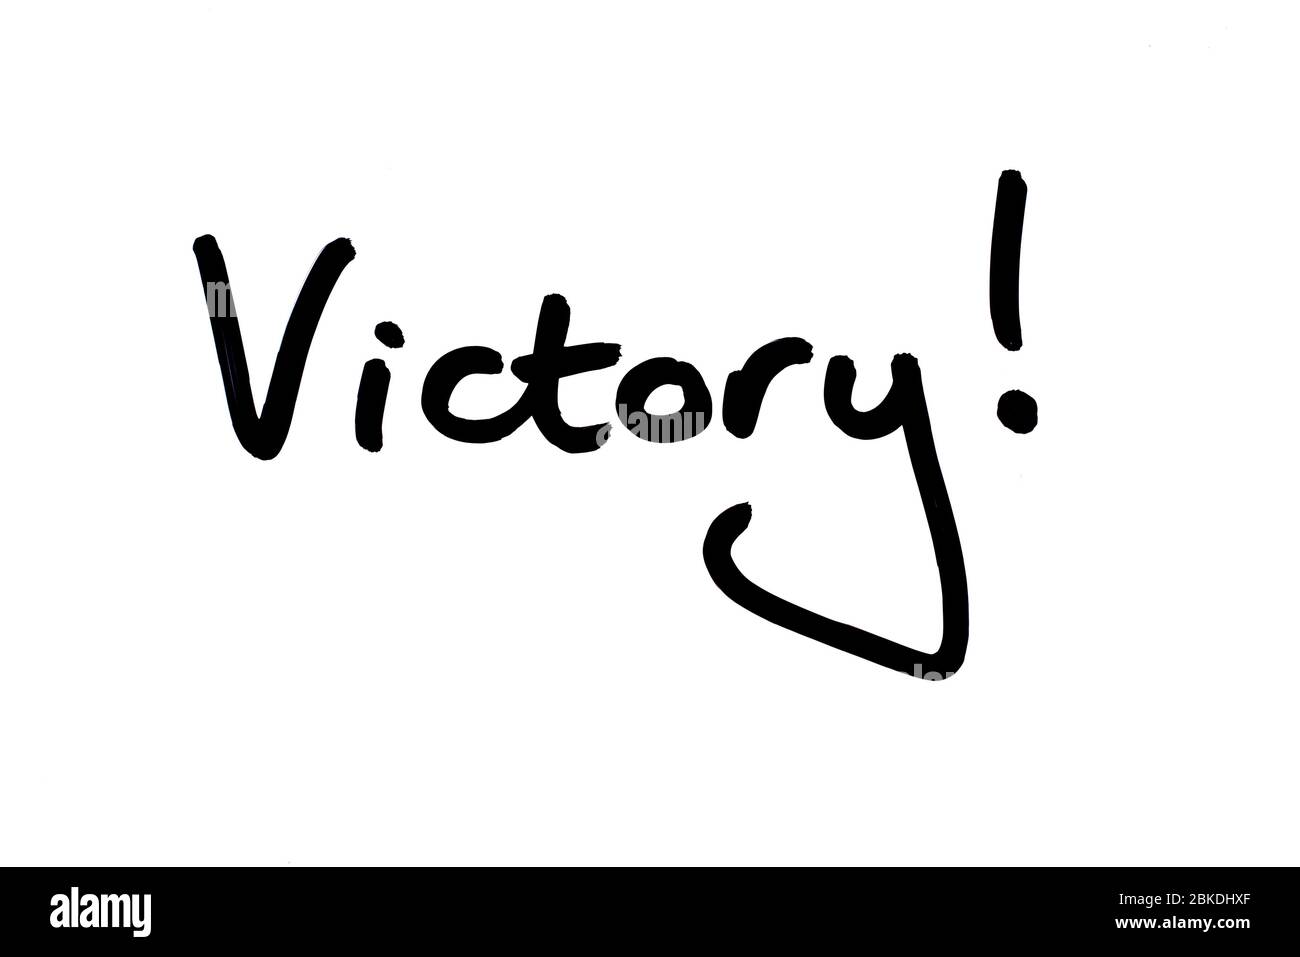 Victory! handwritten on a white background. Stock Photo